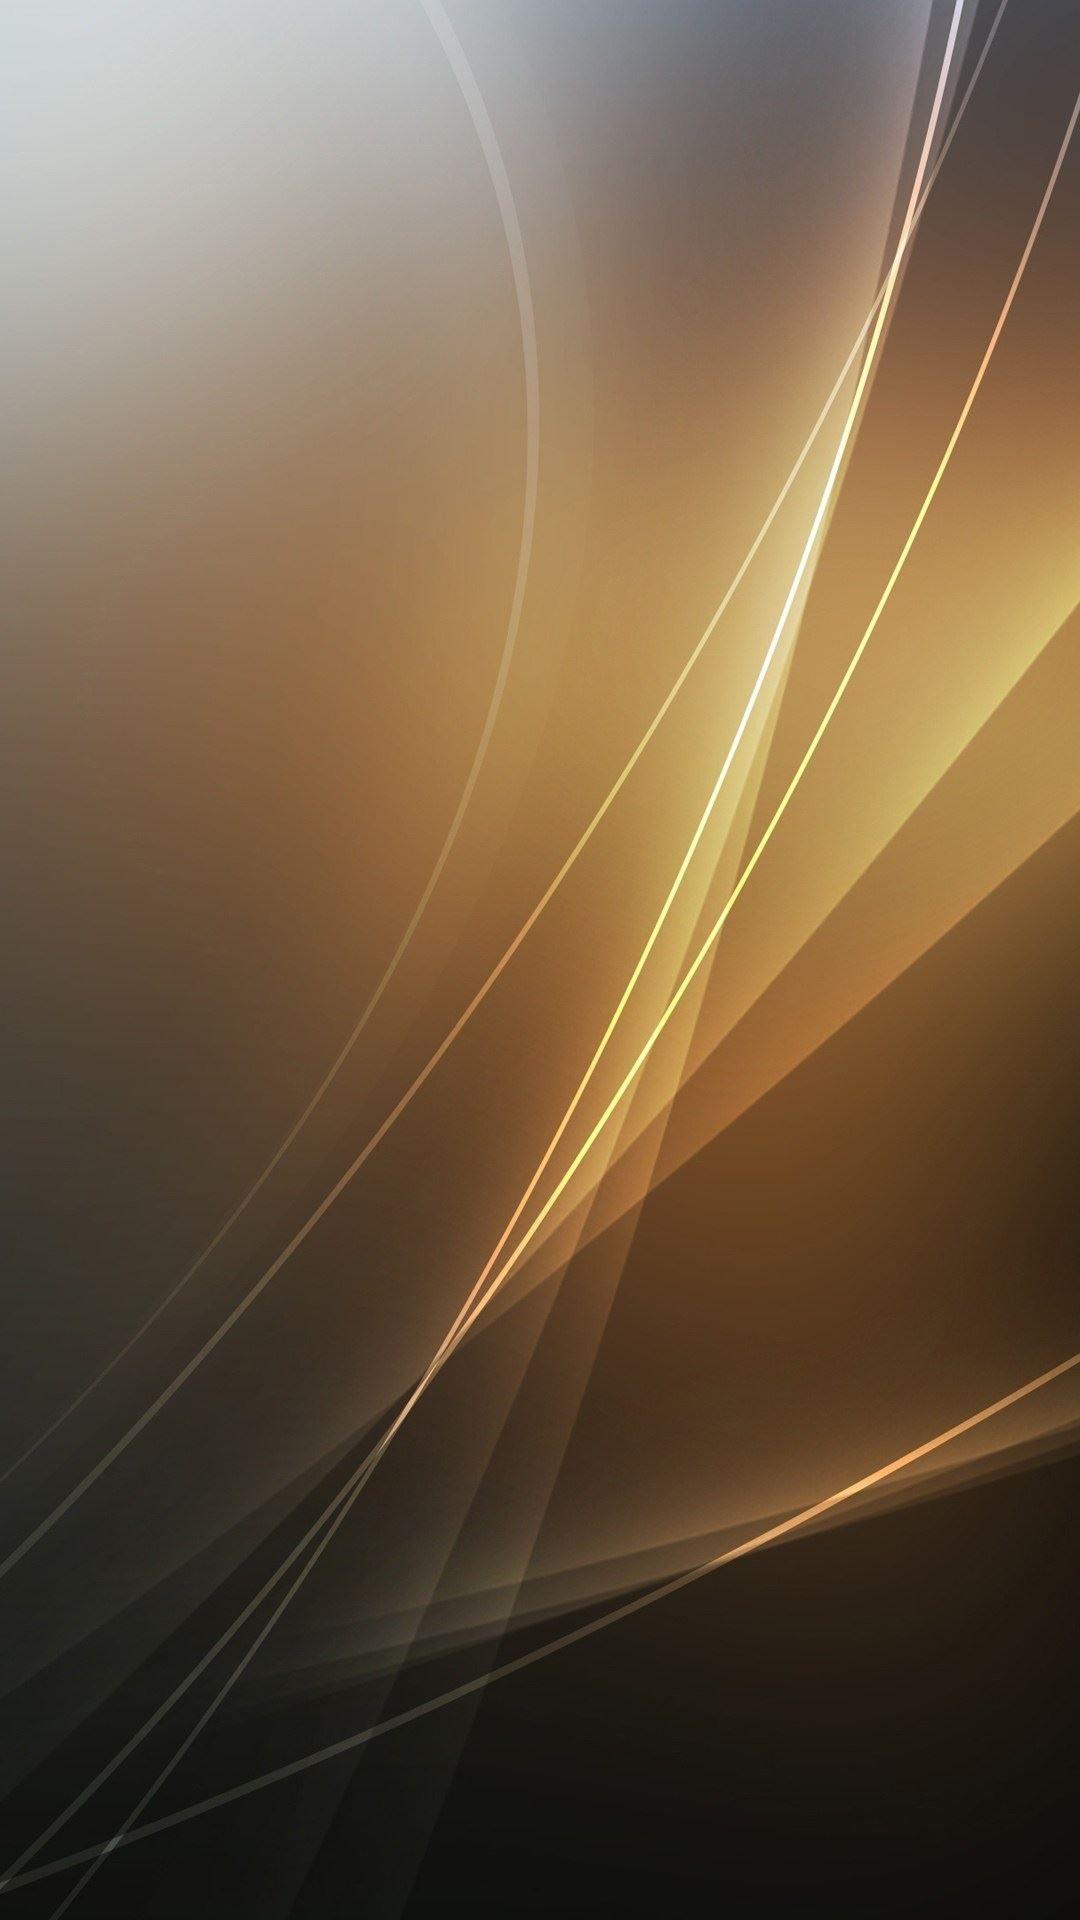 Abstract Golden Light Lines Android Wallpaper. iPhone 6 plus